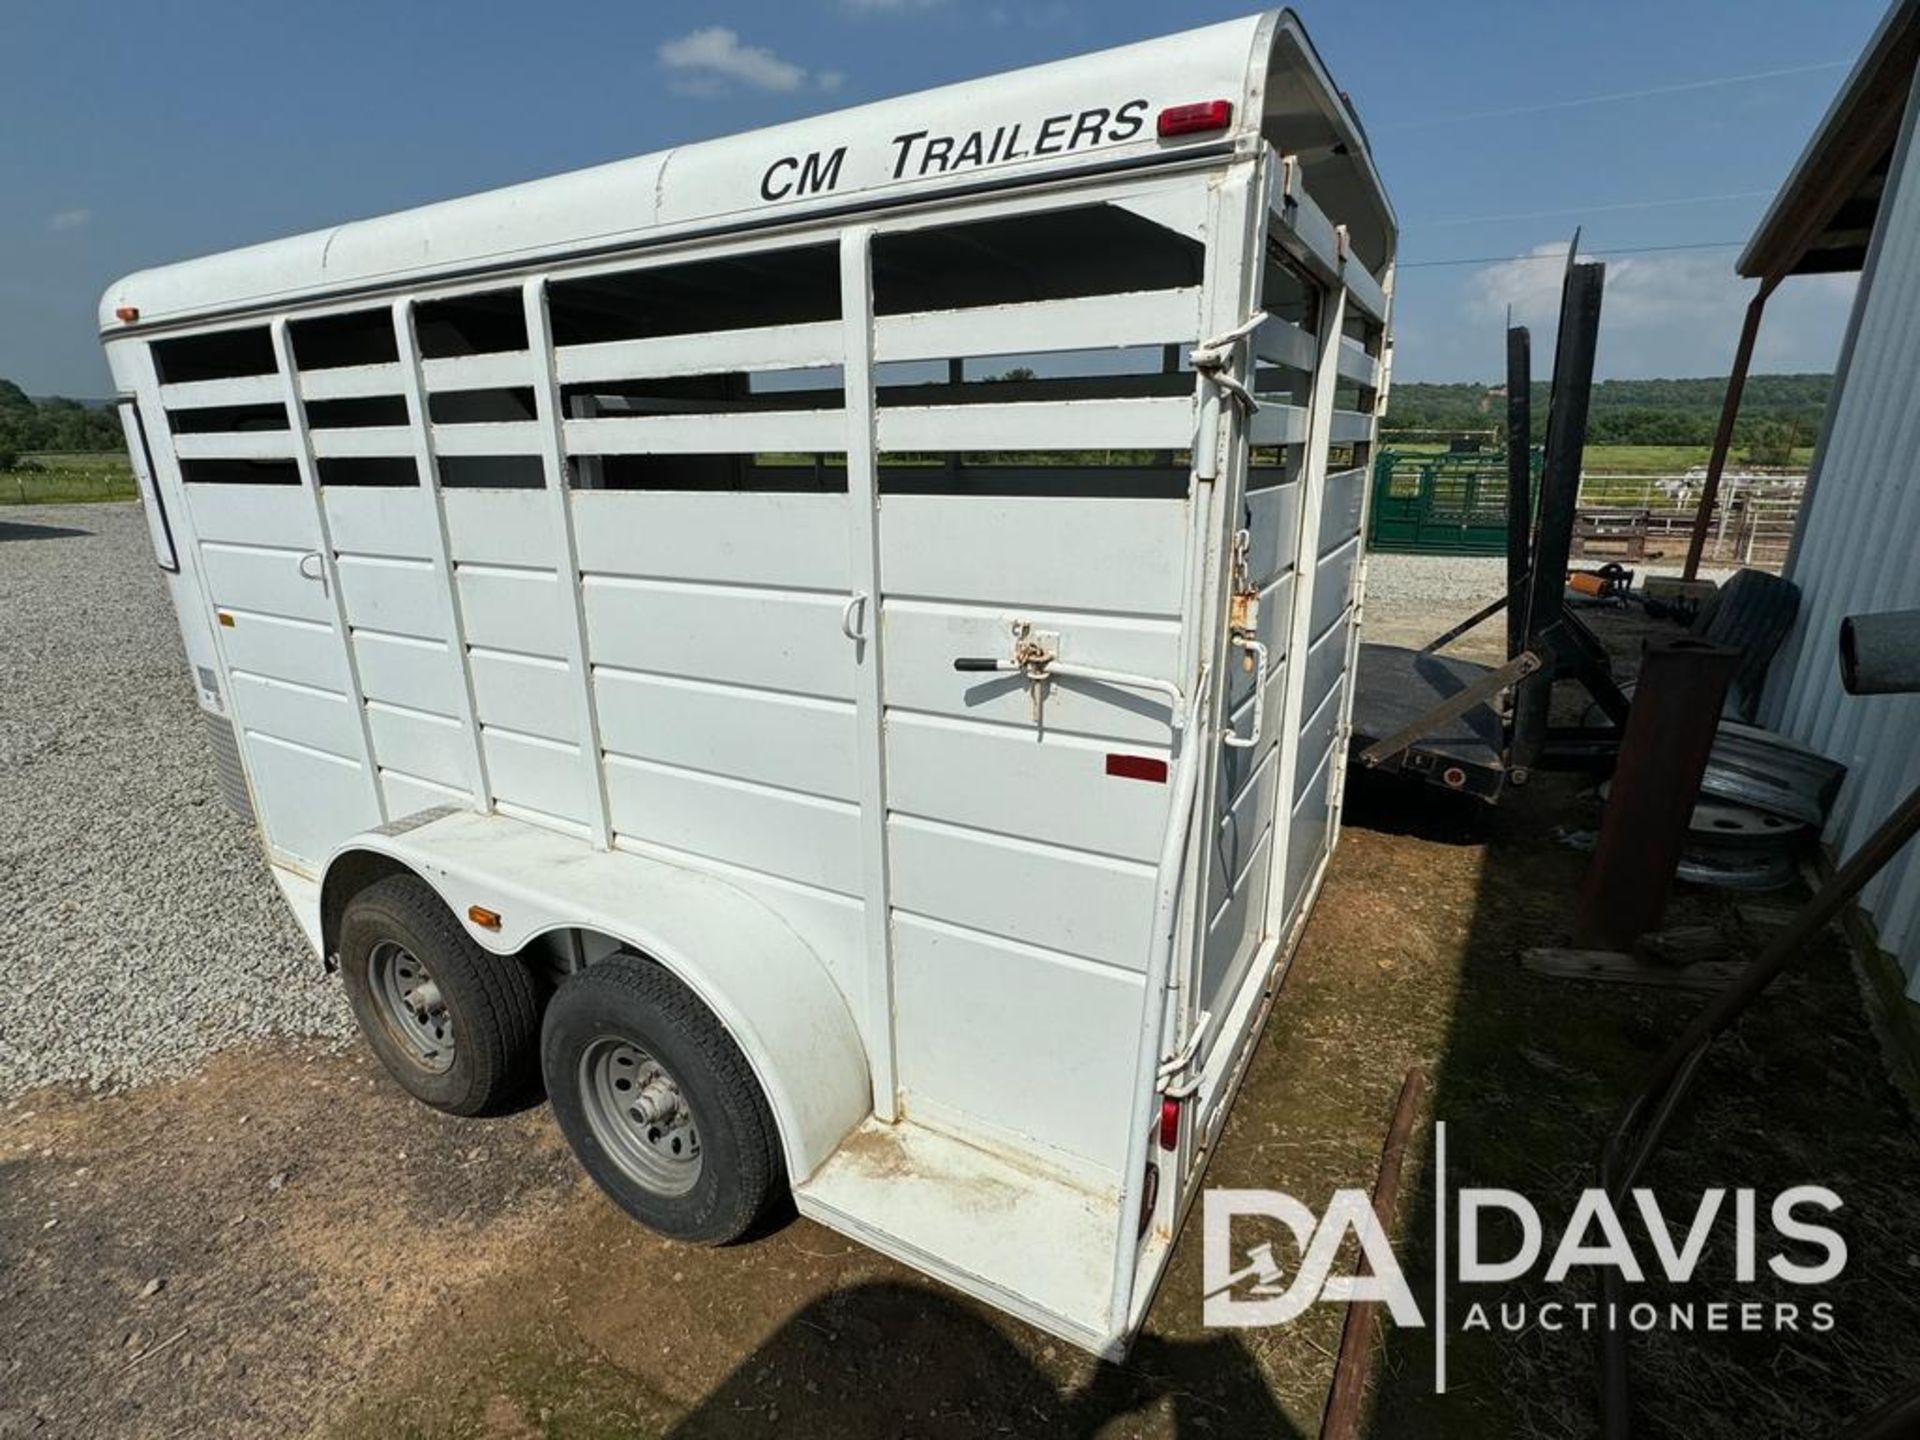 CM Trailers Stock Trailer 16' - Image 4 of 6